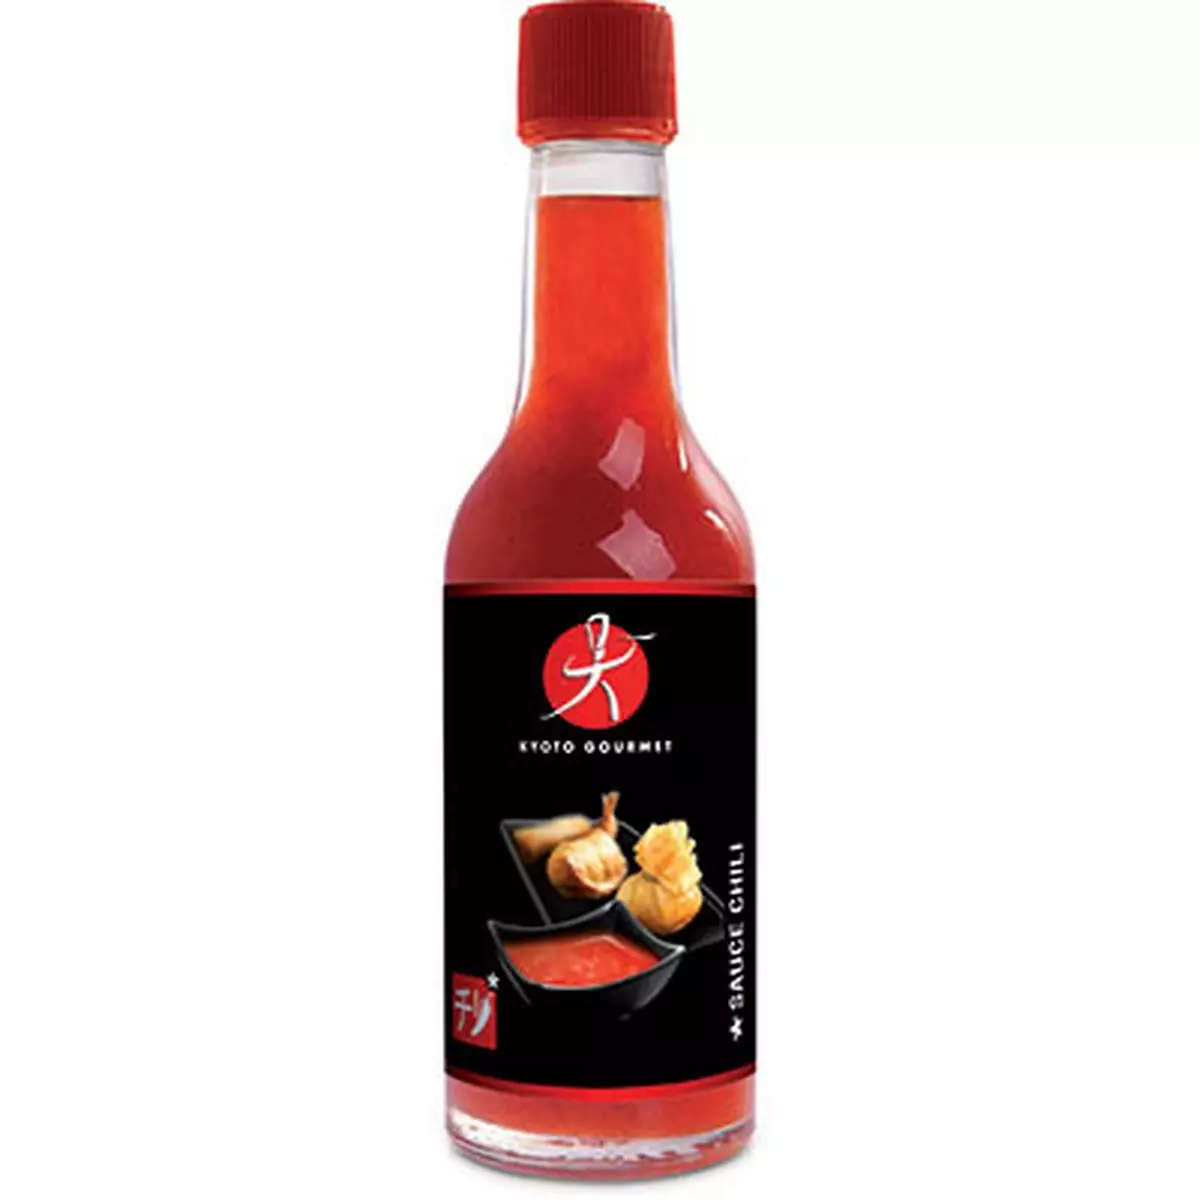 SUSHI SHOP Sauce Sweet Chilly Kyotog gourmet 150g